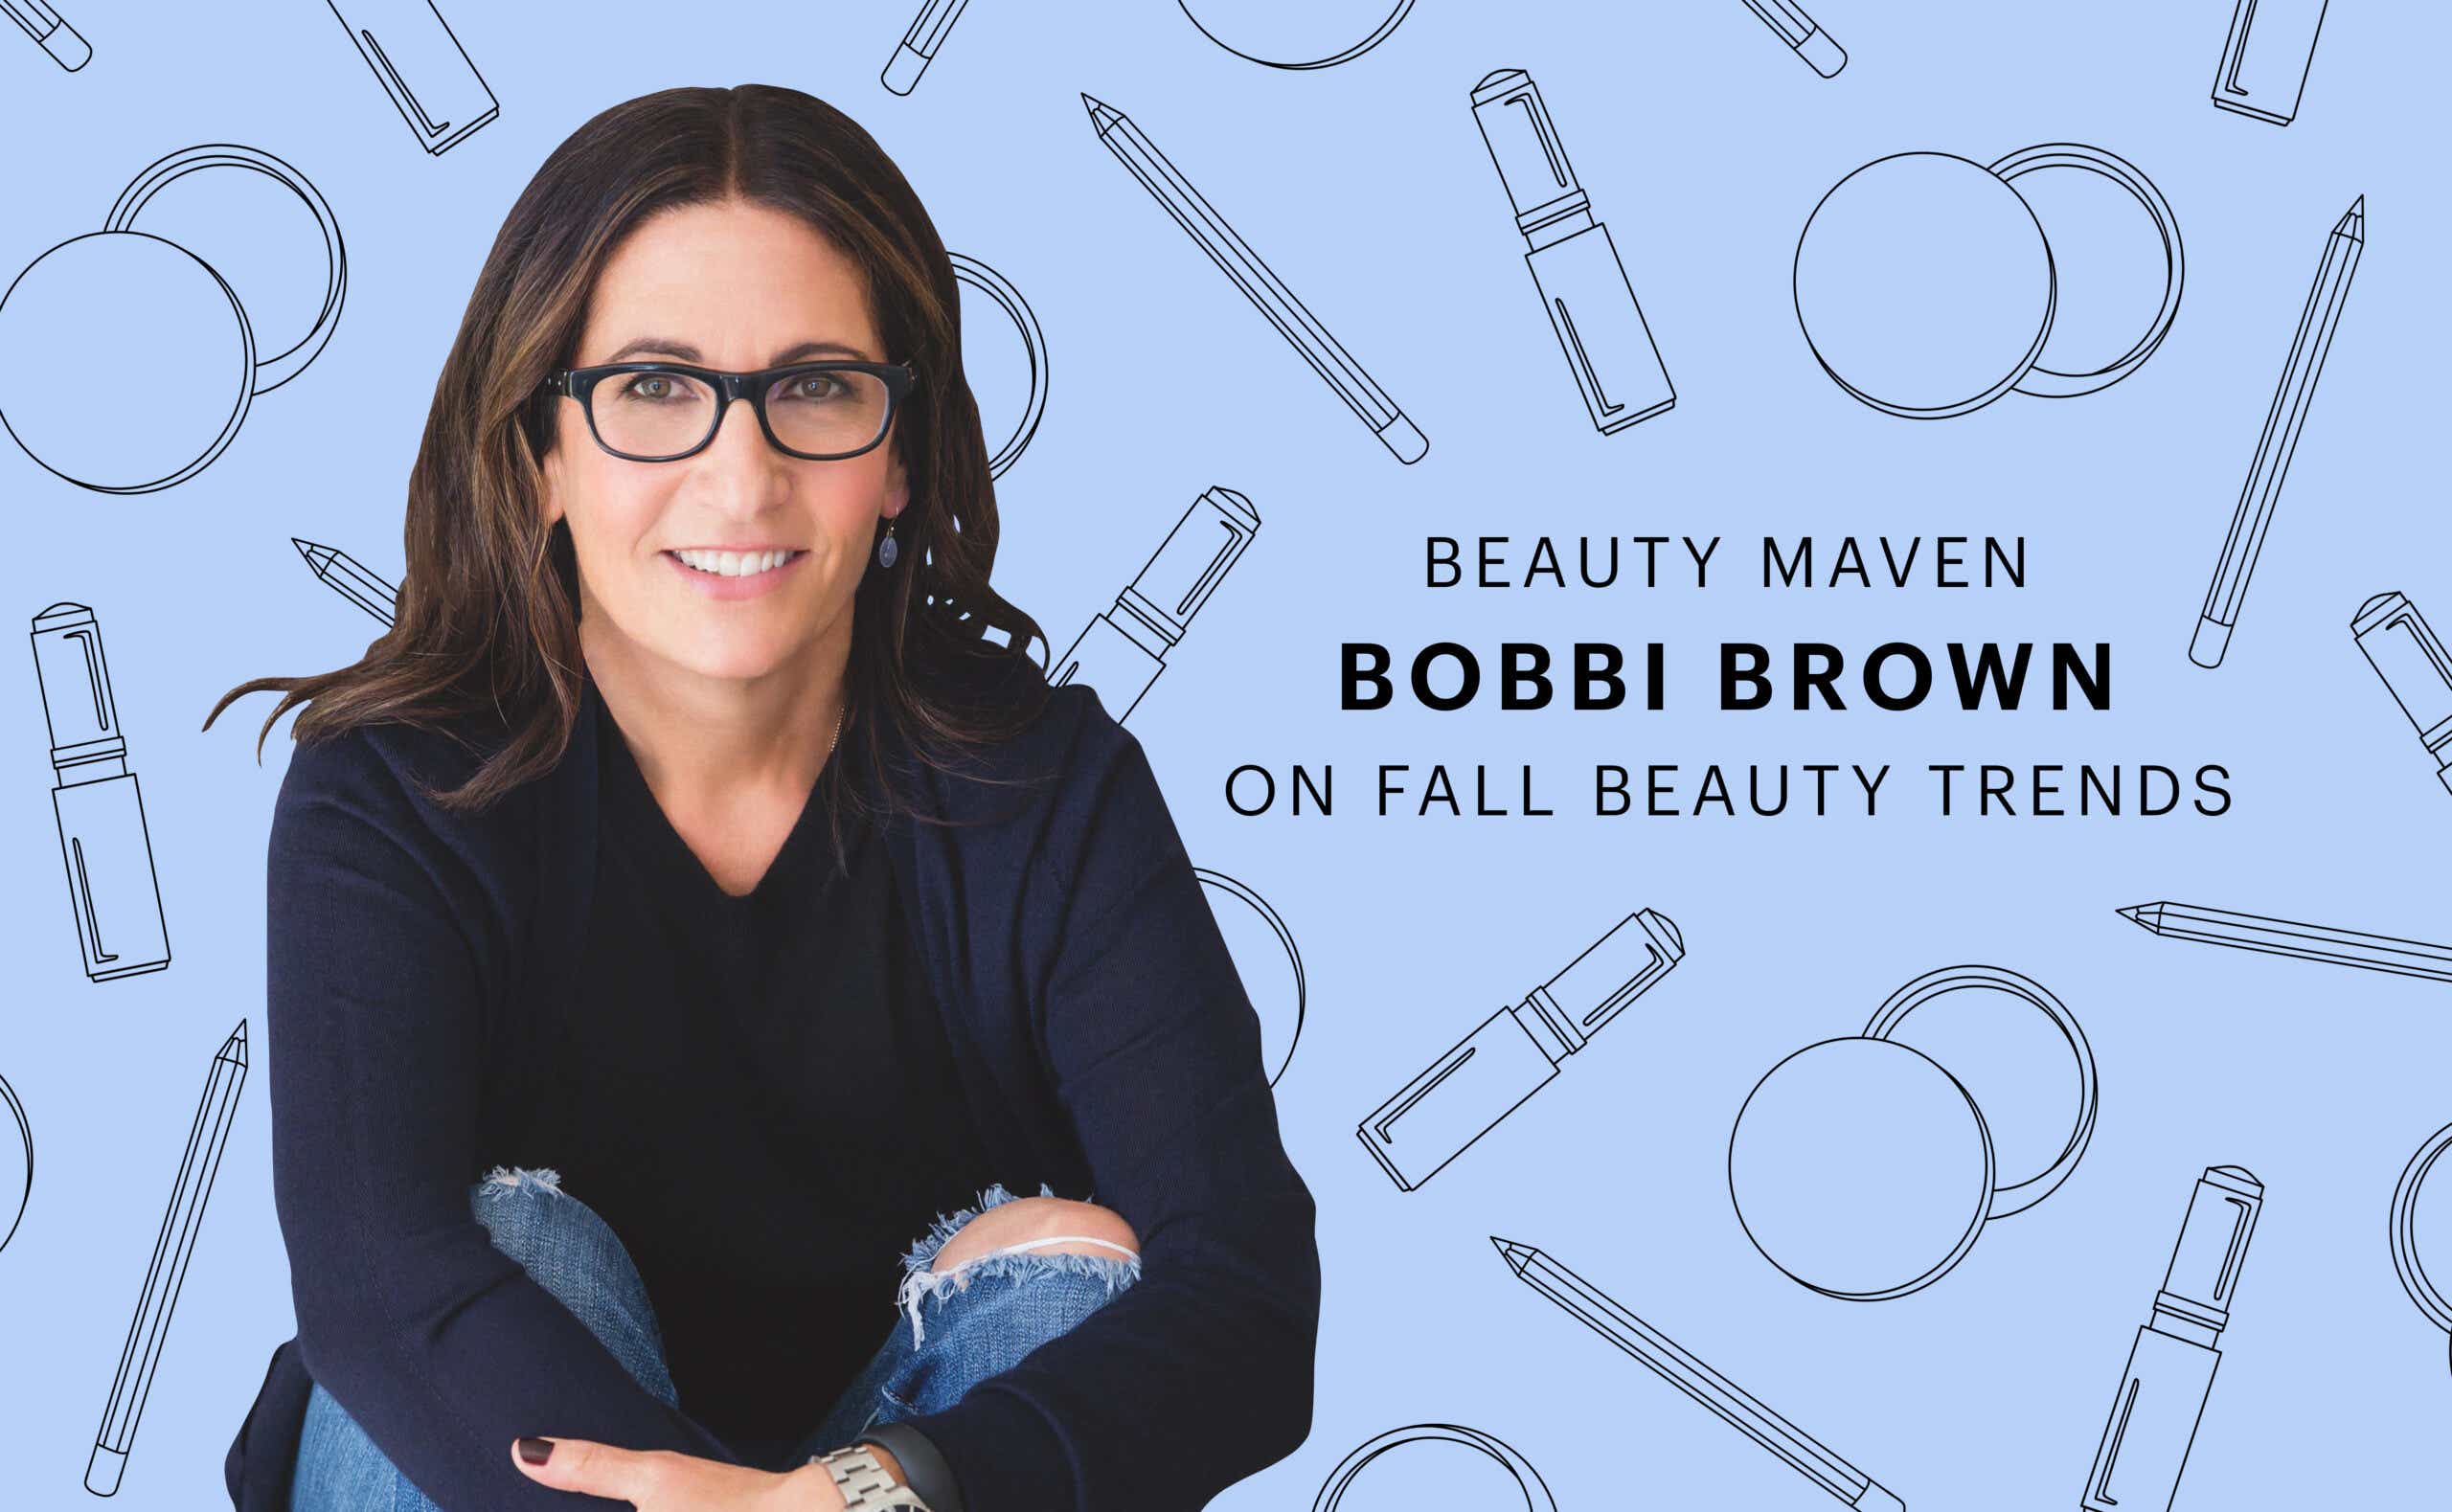 Bobbi Brown on fall beauty trends